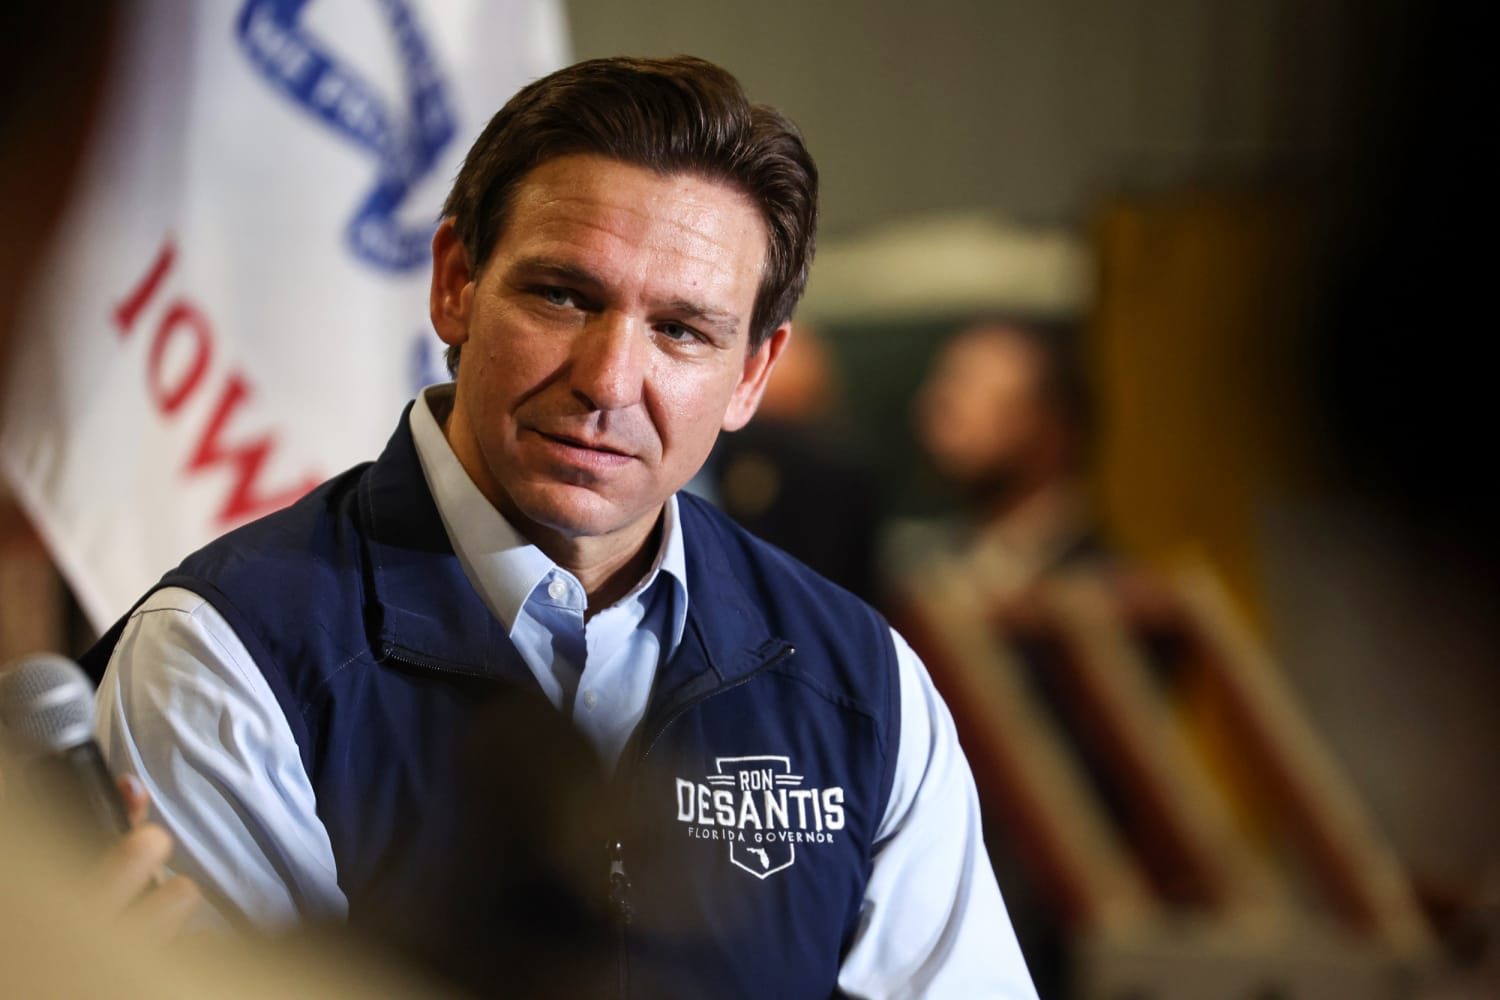 DeSantis distilled How the candidate is introducing himself to GOP voters picture photo